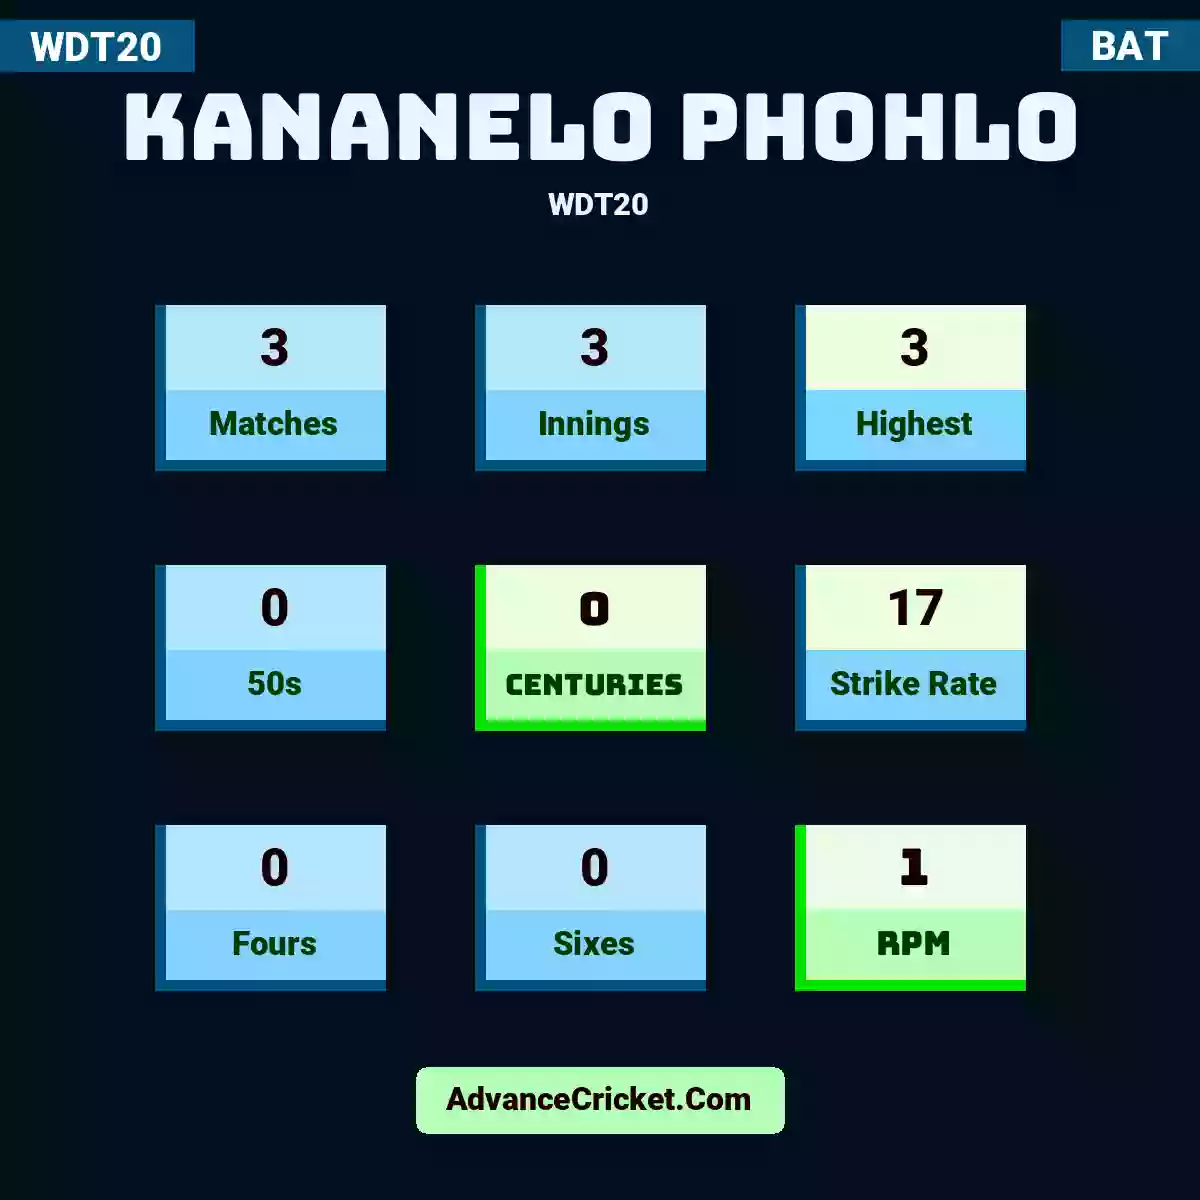 Kananelo Phohlo WDT20 , Kananelo Phohlo played 3 matches, scored 3 runs as highest, 0 half-centuries, and 0 centuries, with a strike rate of 17. K.Phohlo hit 0 fours and 0 sixes, with an RPM of 1.